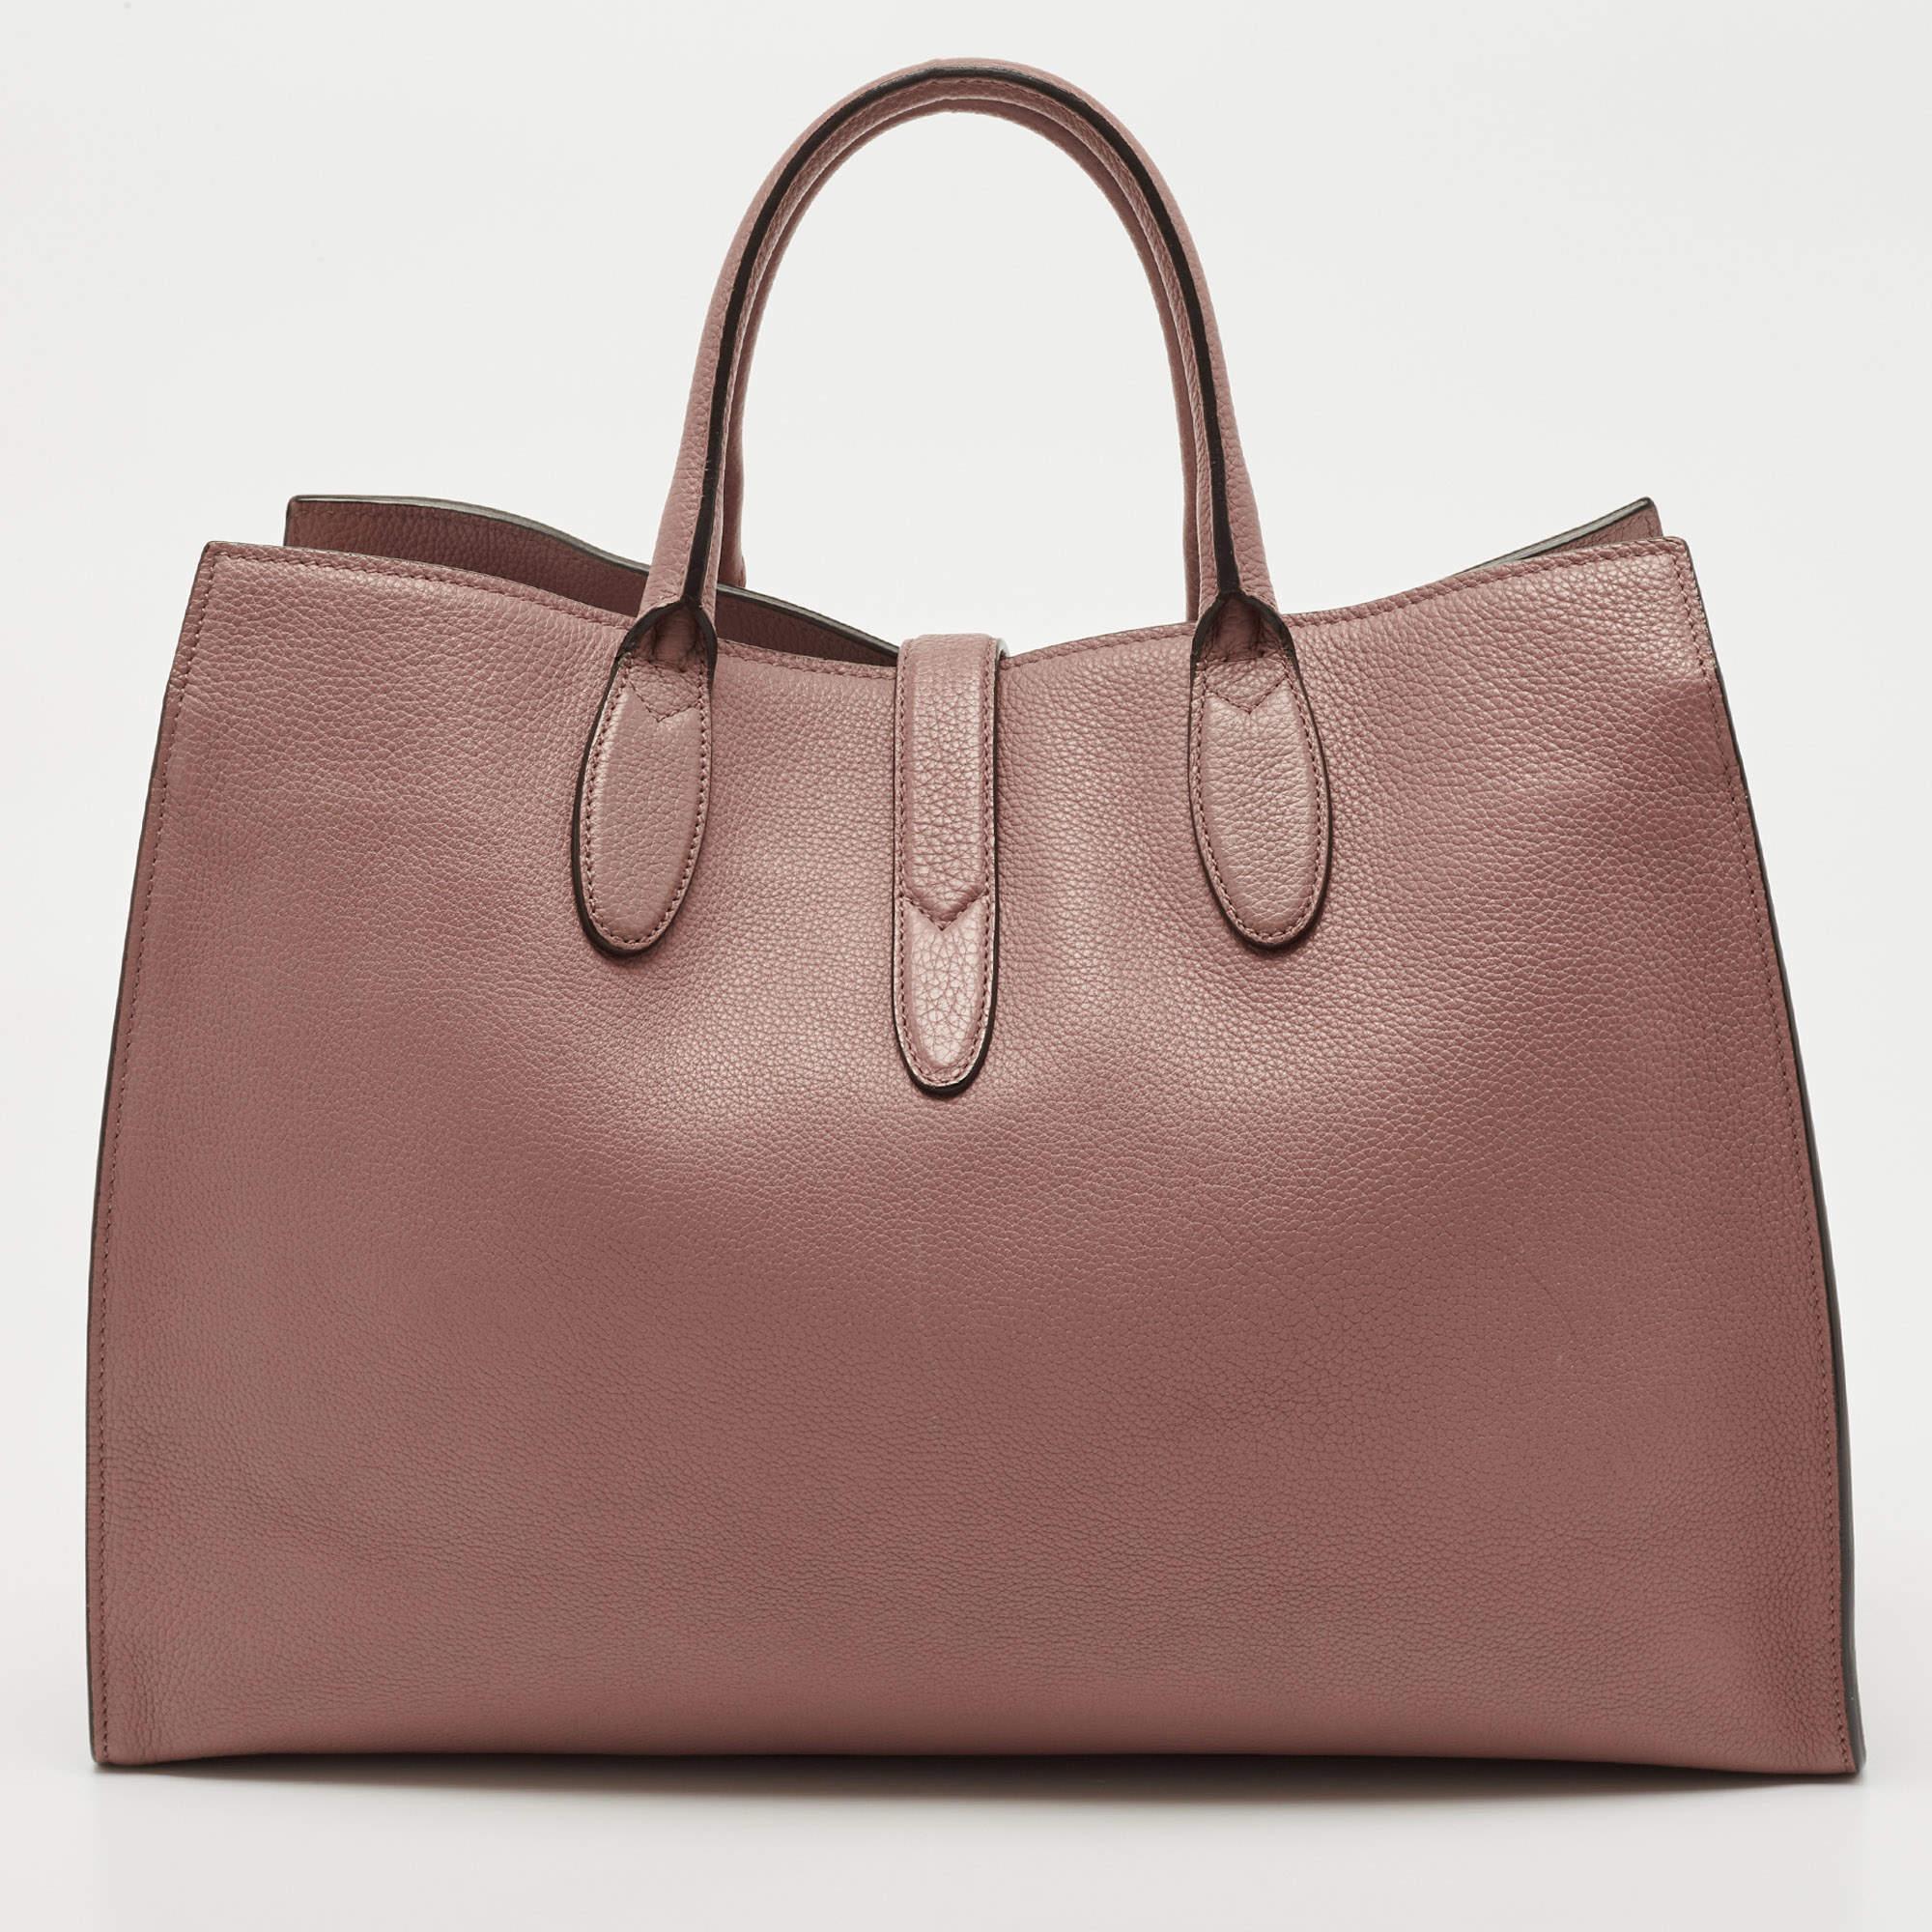 Be it your daily commute to work, shopping sprees, and vacations, this Gucci Soft Jackie tote bag will never fail you. This designer creation is made to last and assist you in your fashion-filled days.

Includes: Original Dustbag

